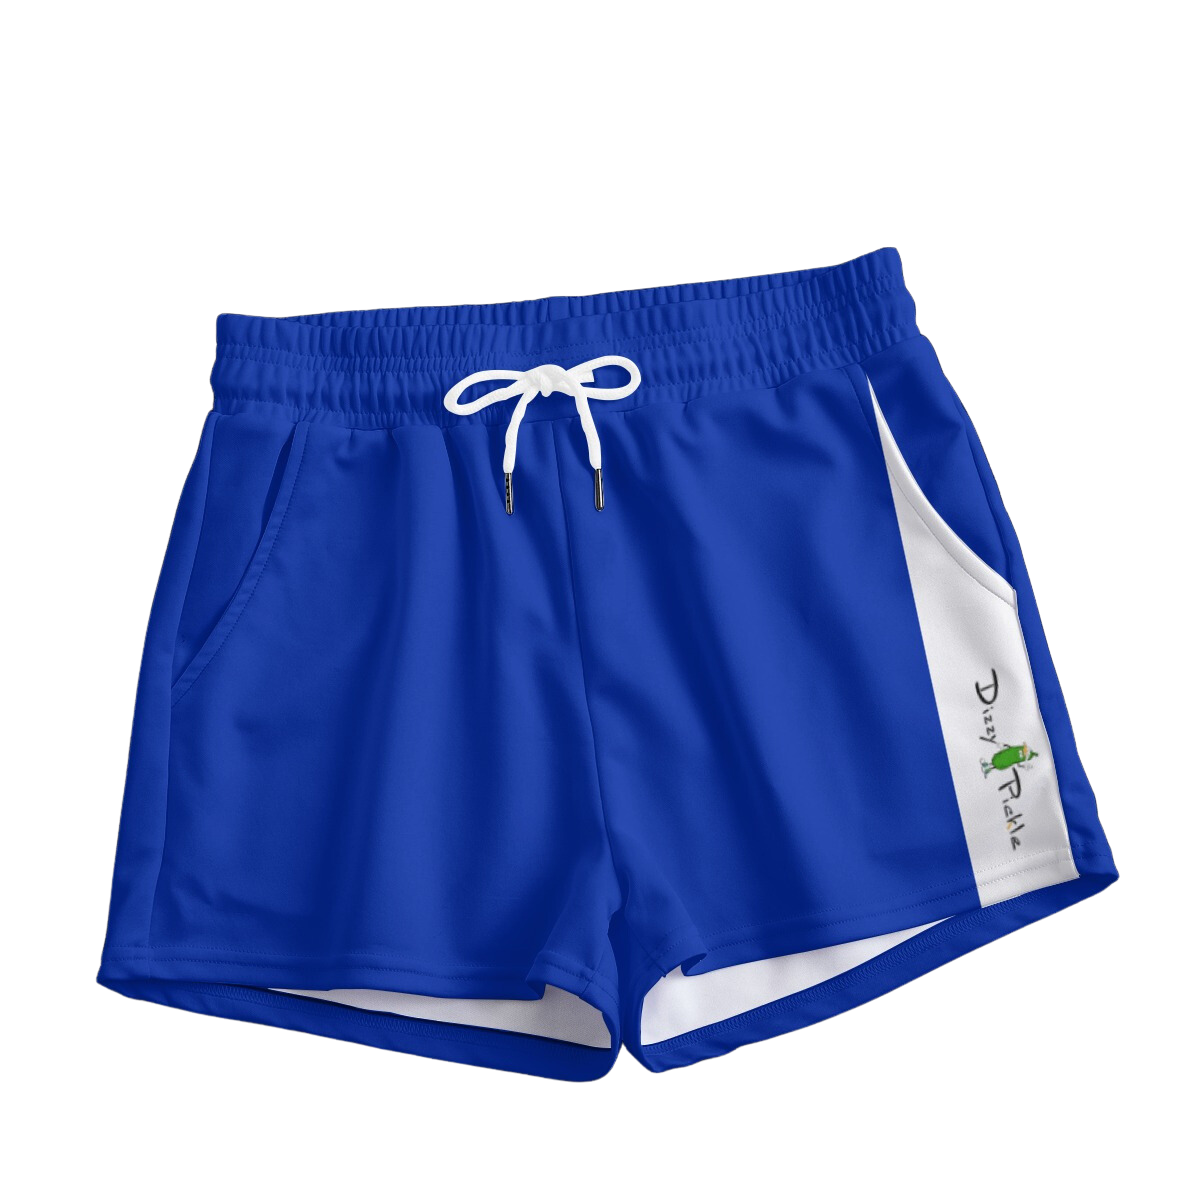 Dizzy Pickle DZY P Classic Women's Pickleball Casual Shorts with Pockets Blue